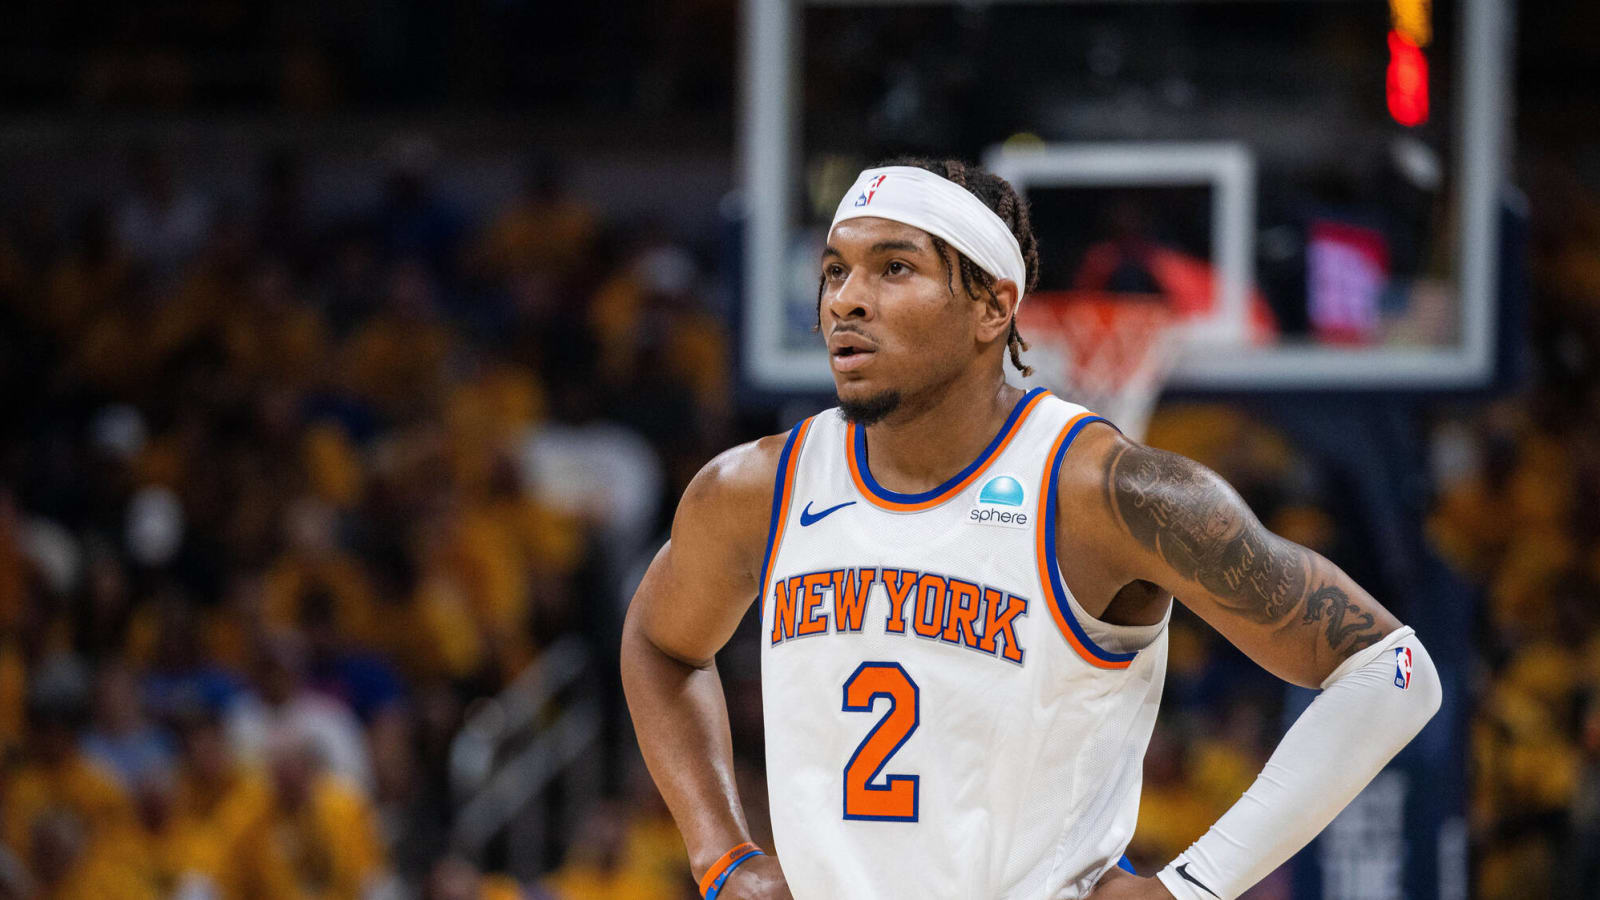 Can Knicks rising star make good on his goal to leave Pacers stars scoreless?